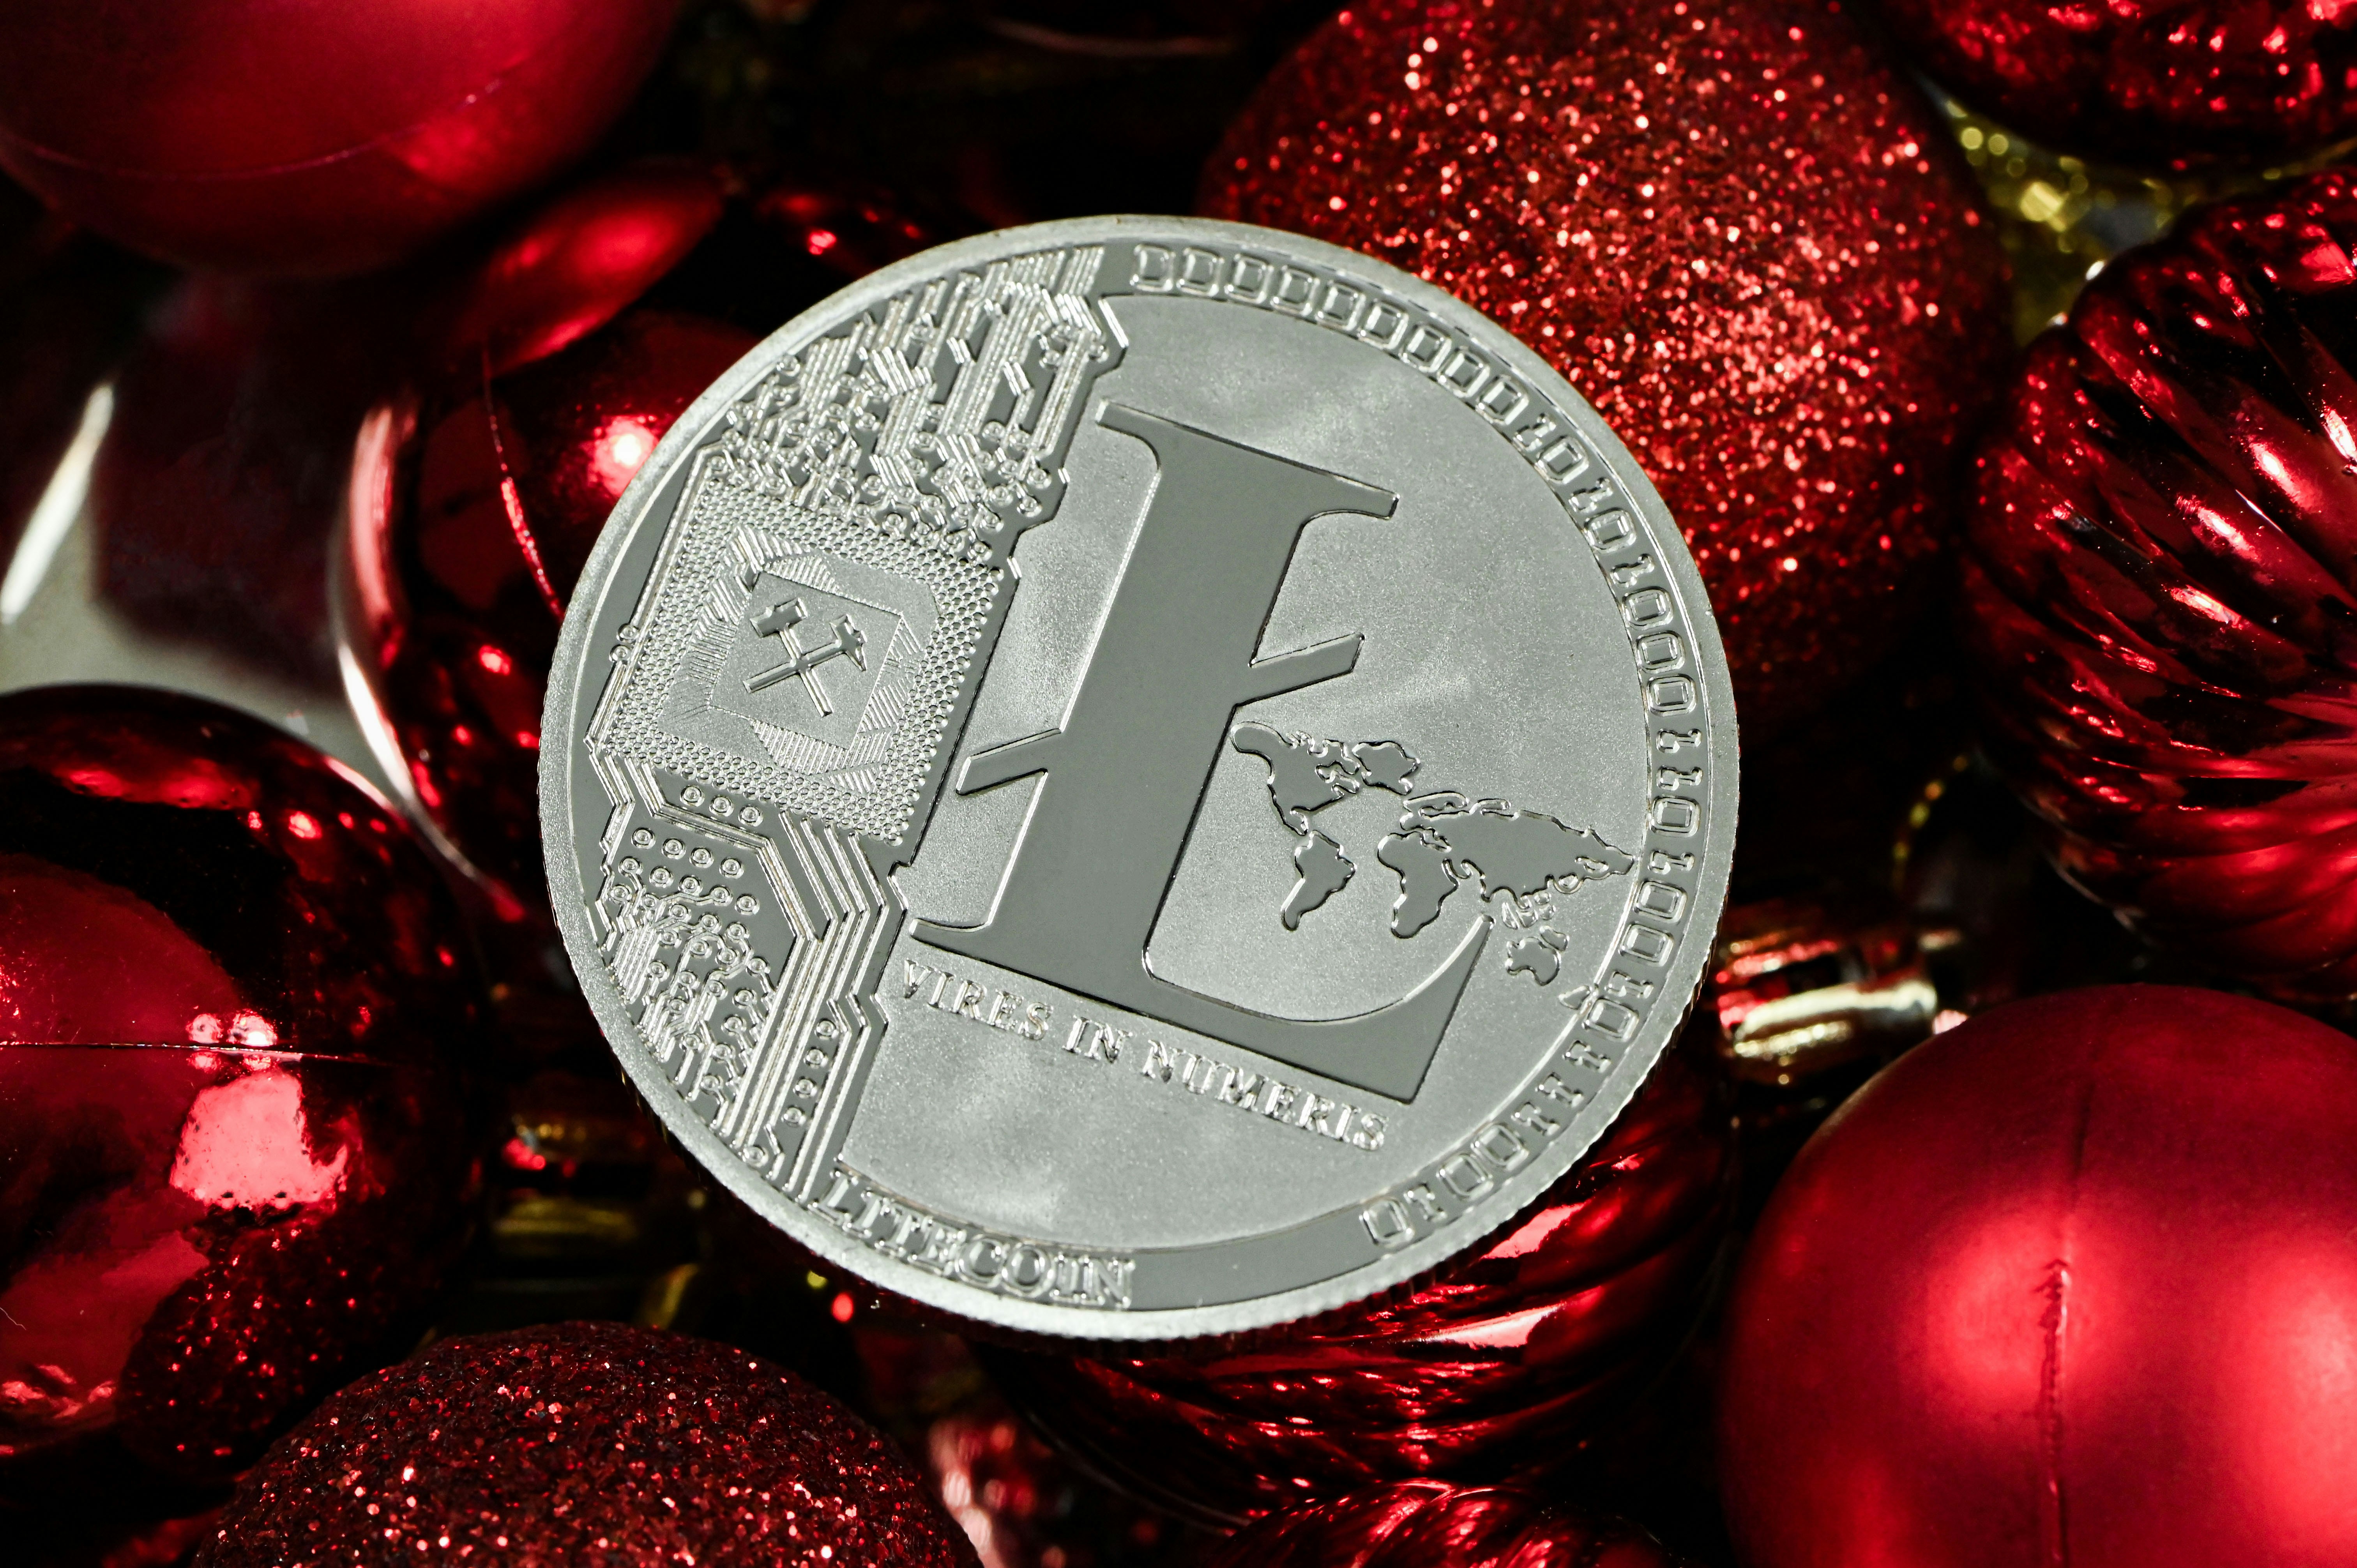 A silver Litecoin placed on the red balls